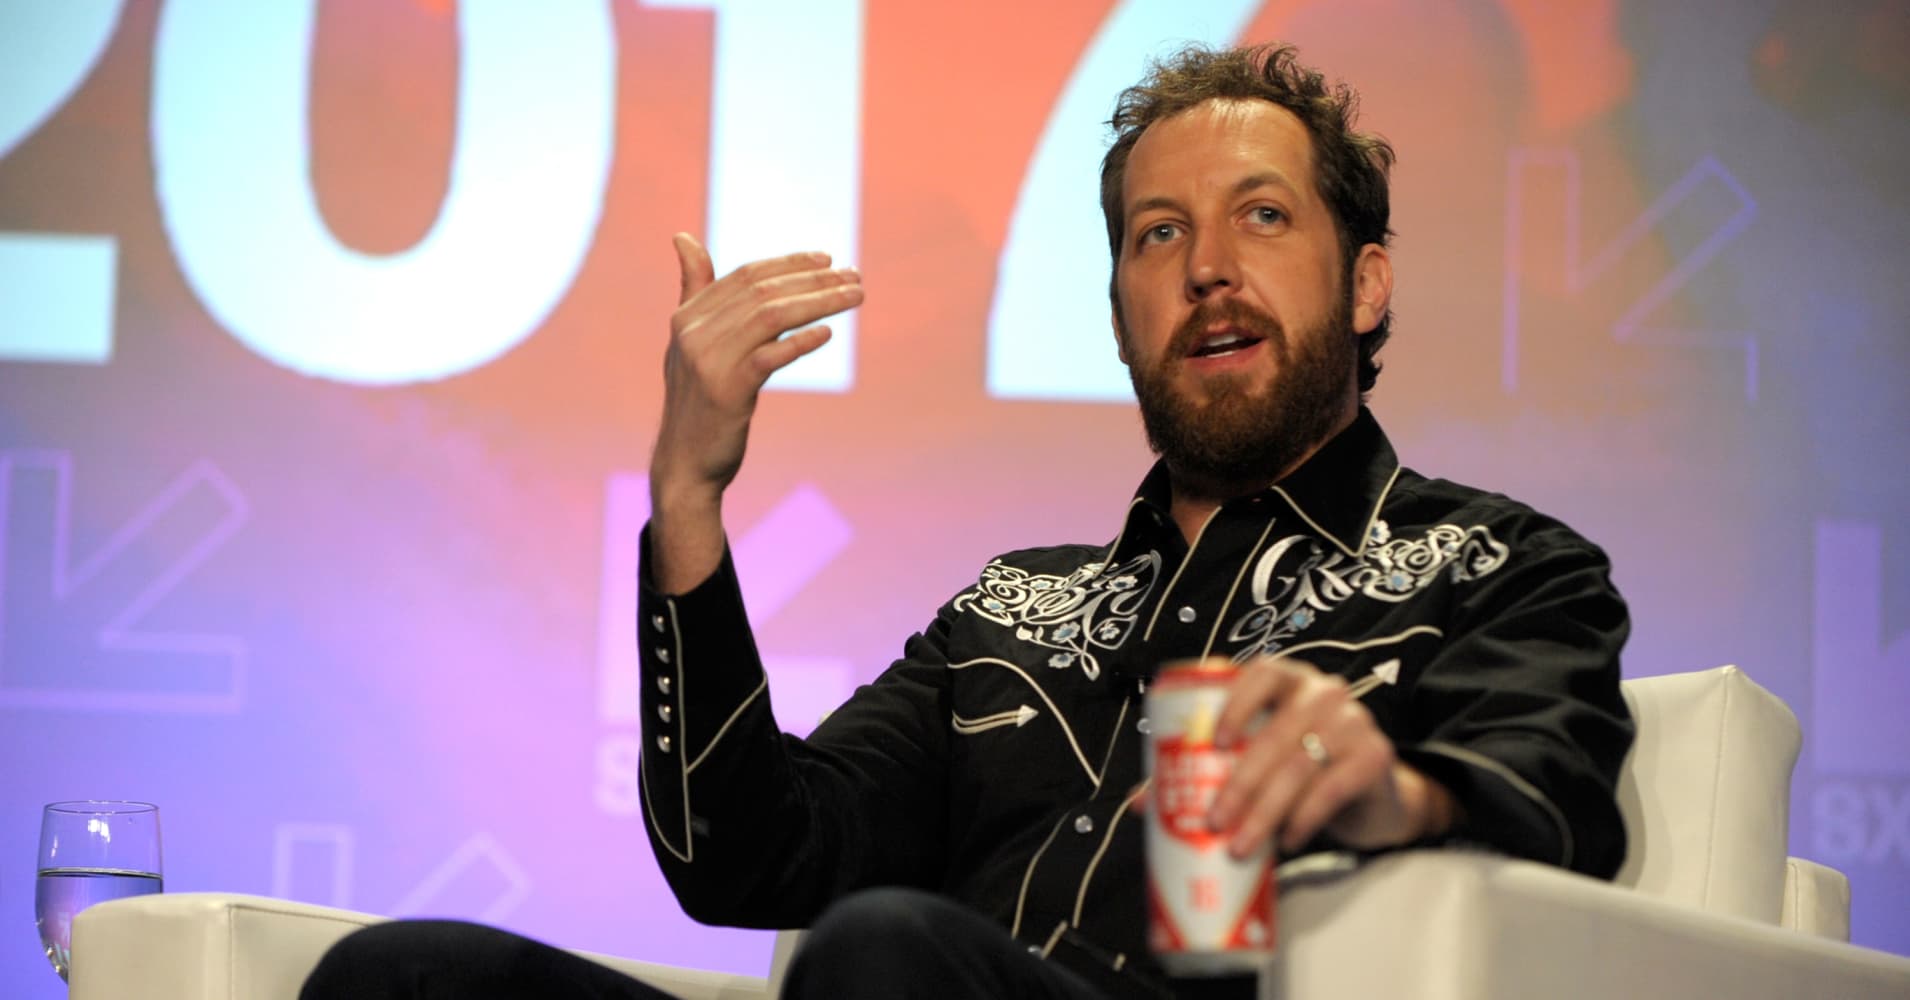 Billionaire Chris Sacca plans a start-up blitz to back the eventual 2020 Dem nominee for president